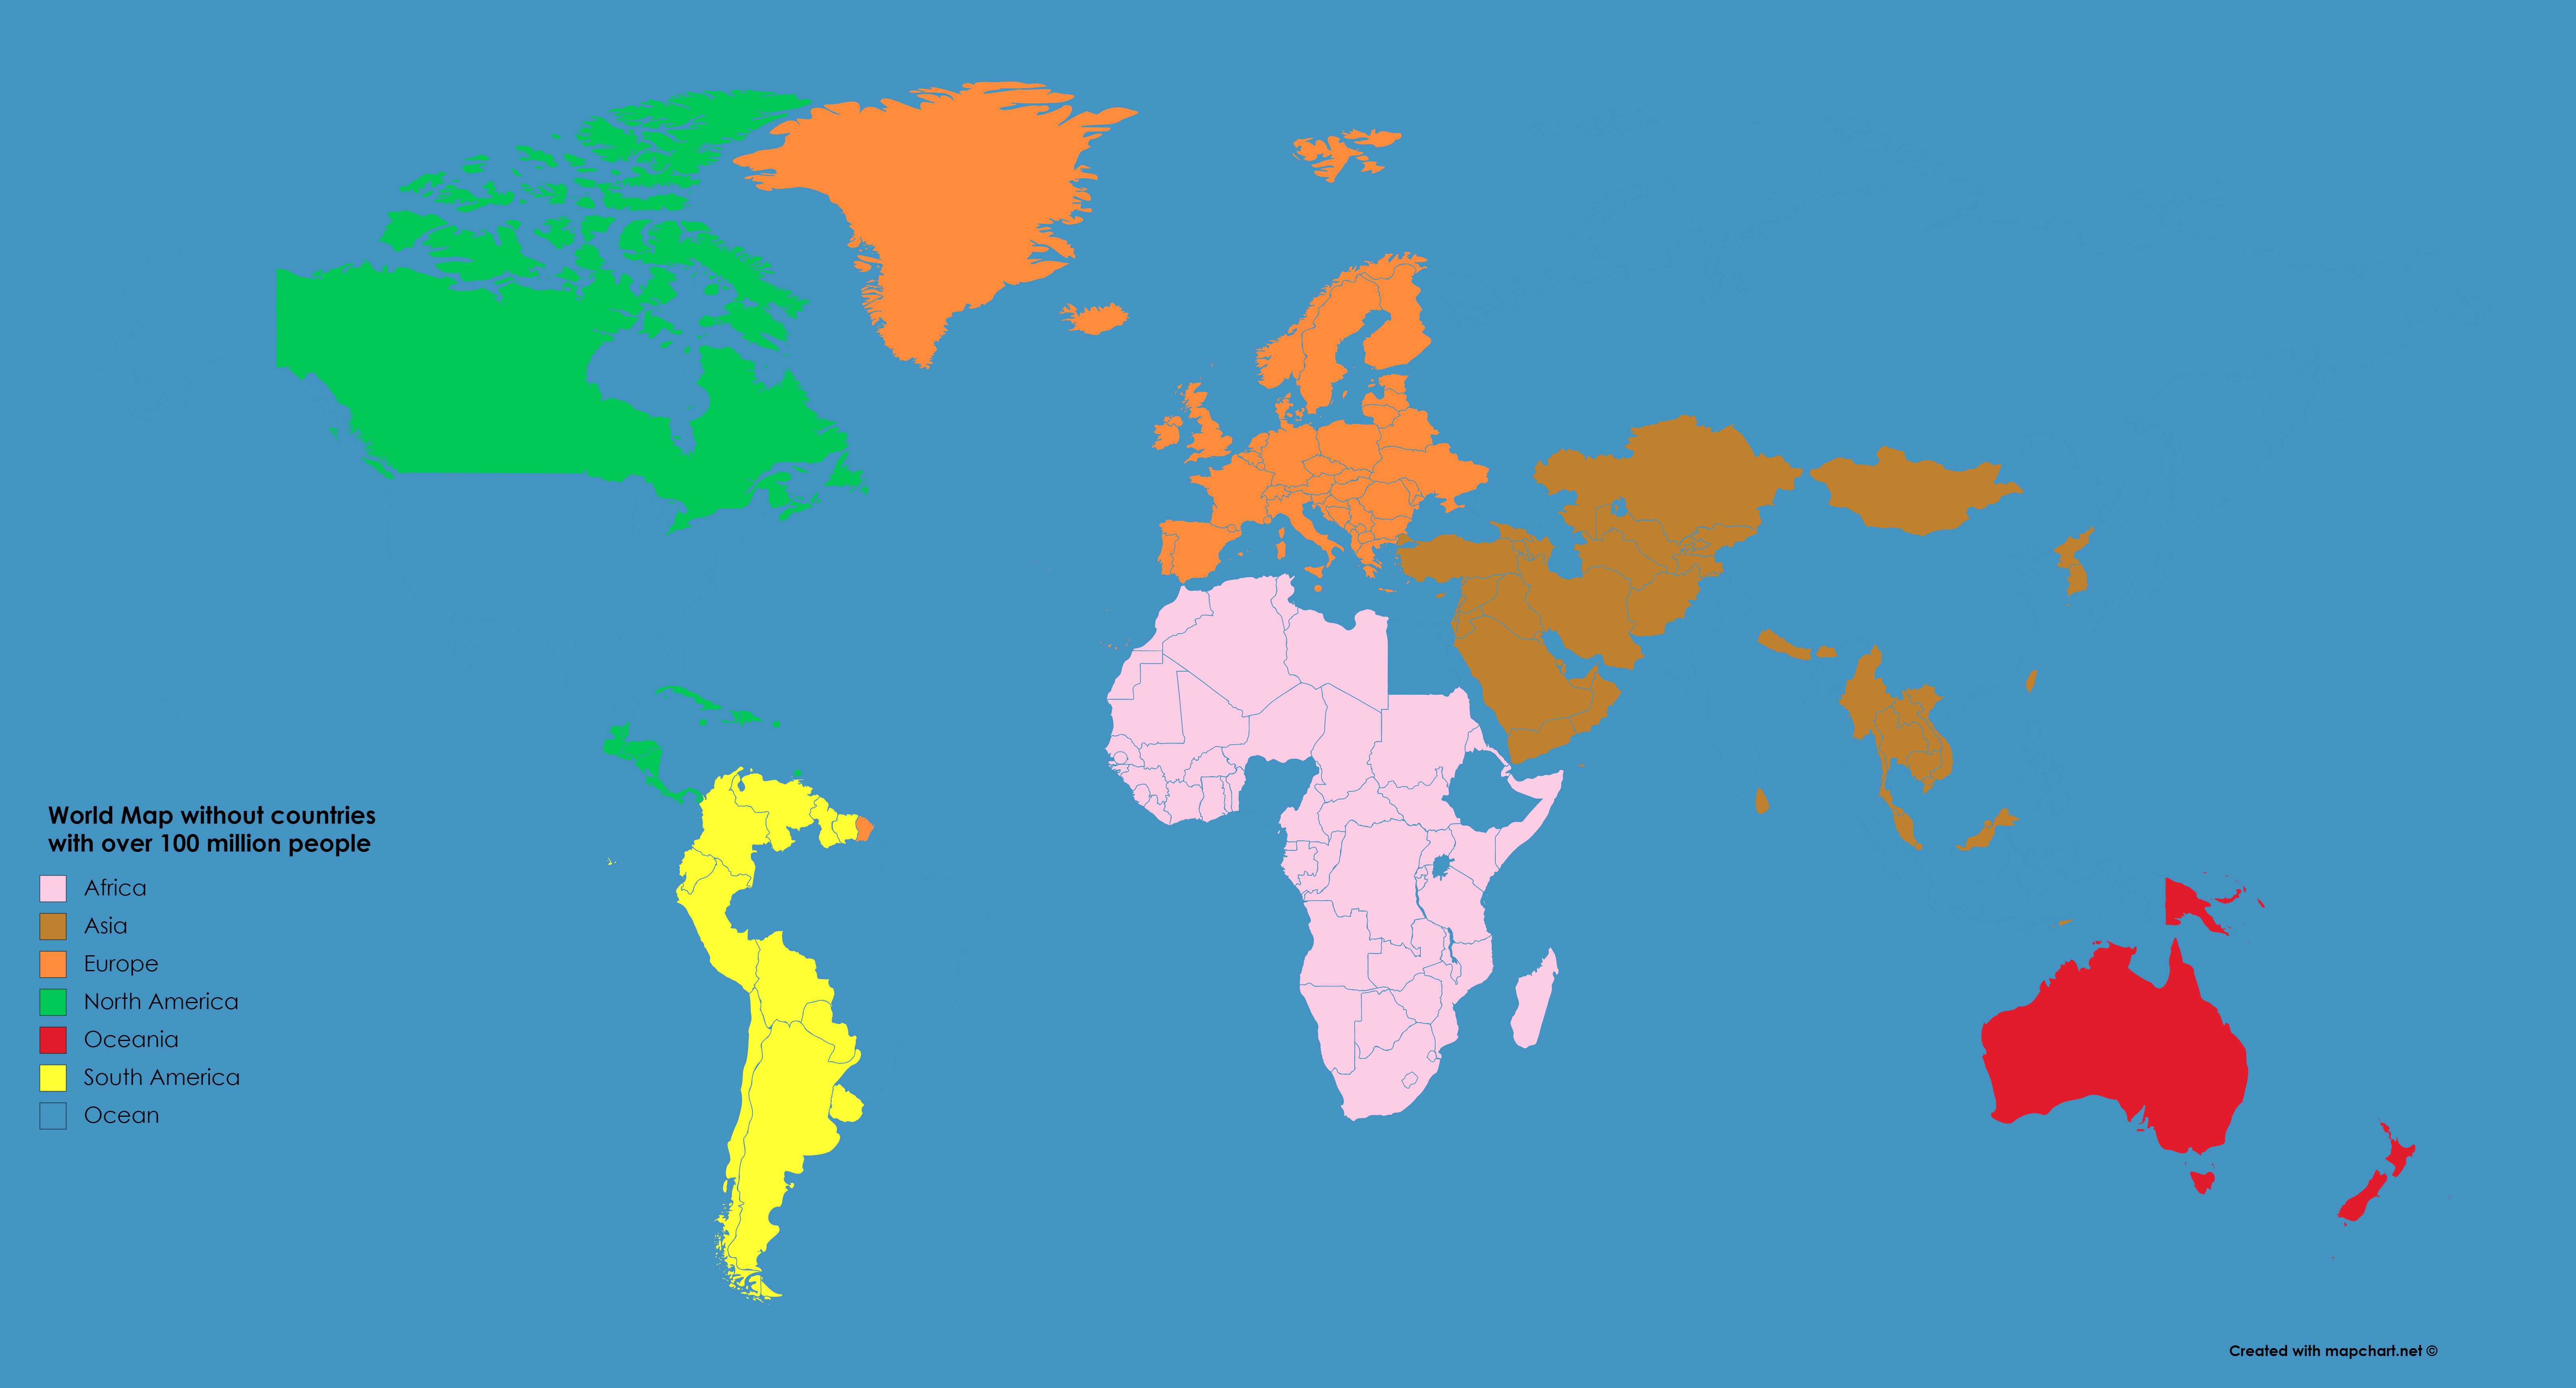 A Map Of The World Without Countries That Have Over 100 Million People 